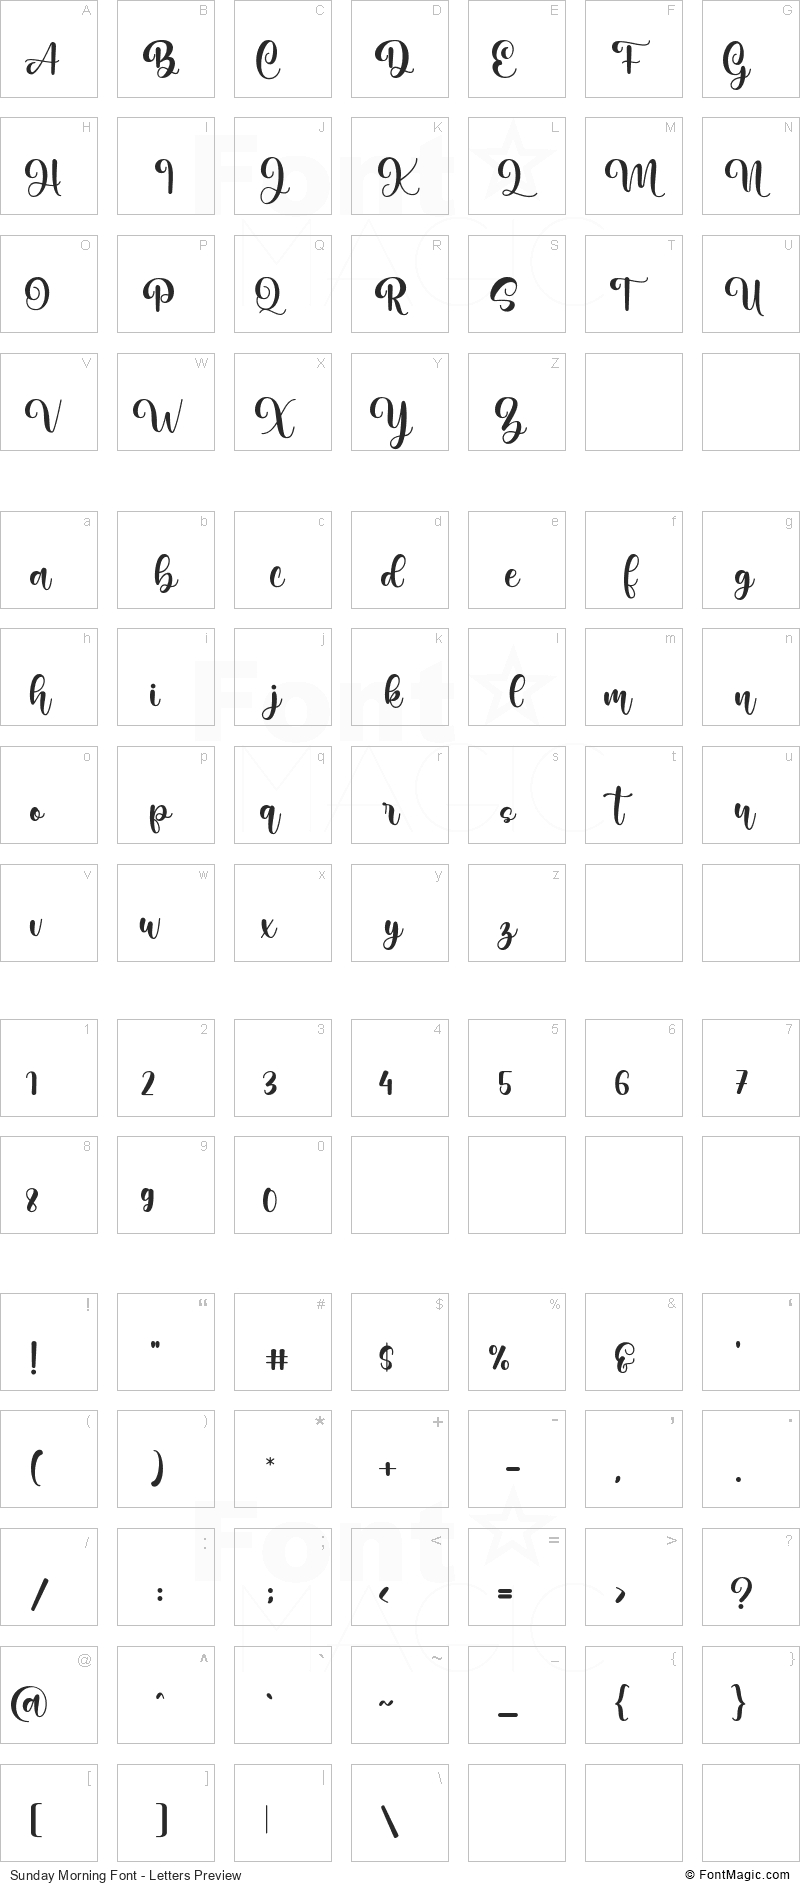 Sunday Morning Font - All Latters Preview Chart